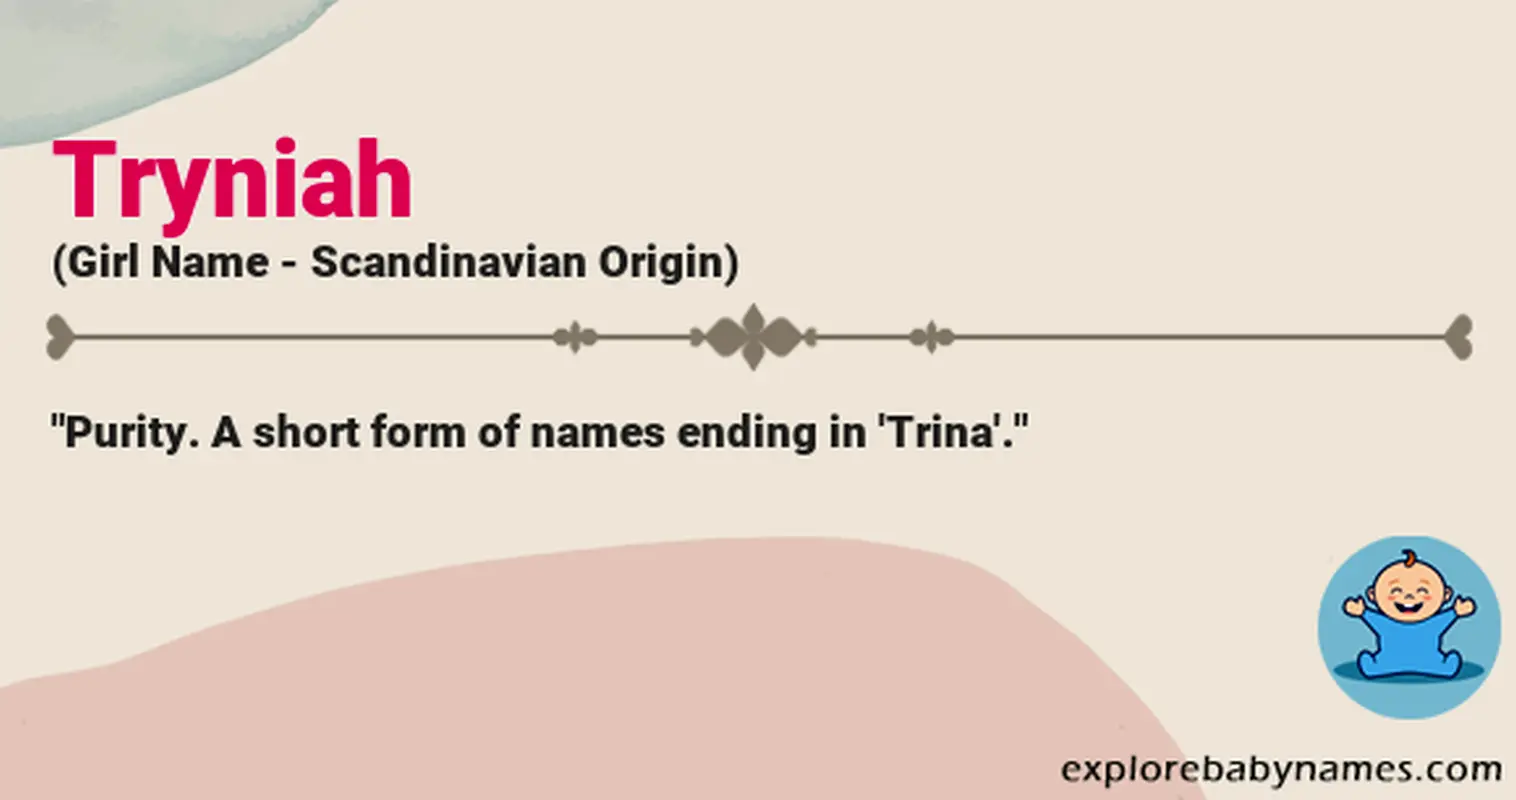 Meaning of Tryniah